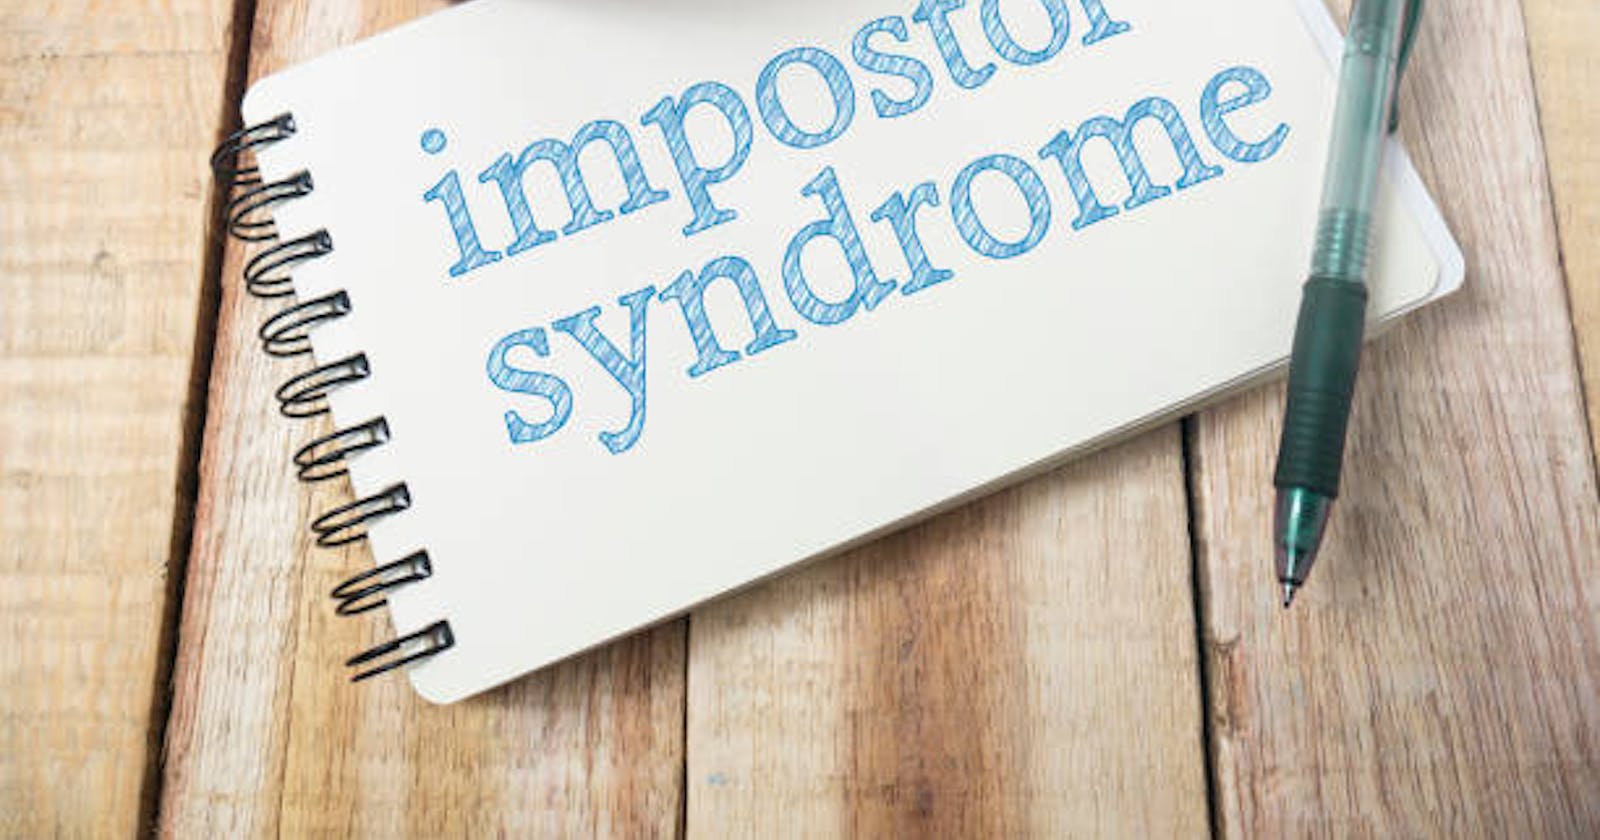 The Myths about Imposter Syndrome and Its symptoms